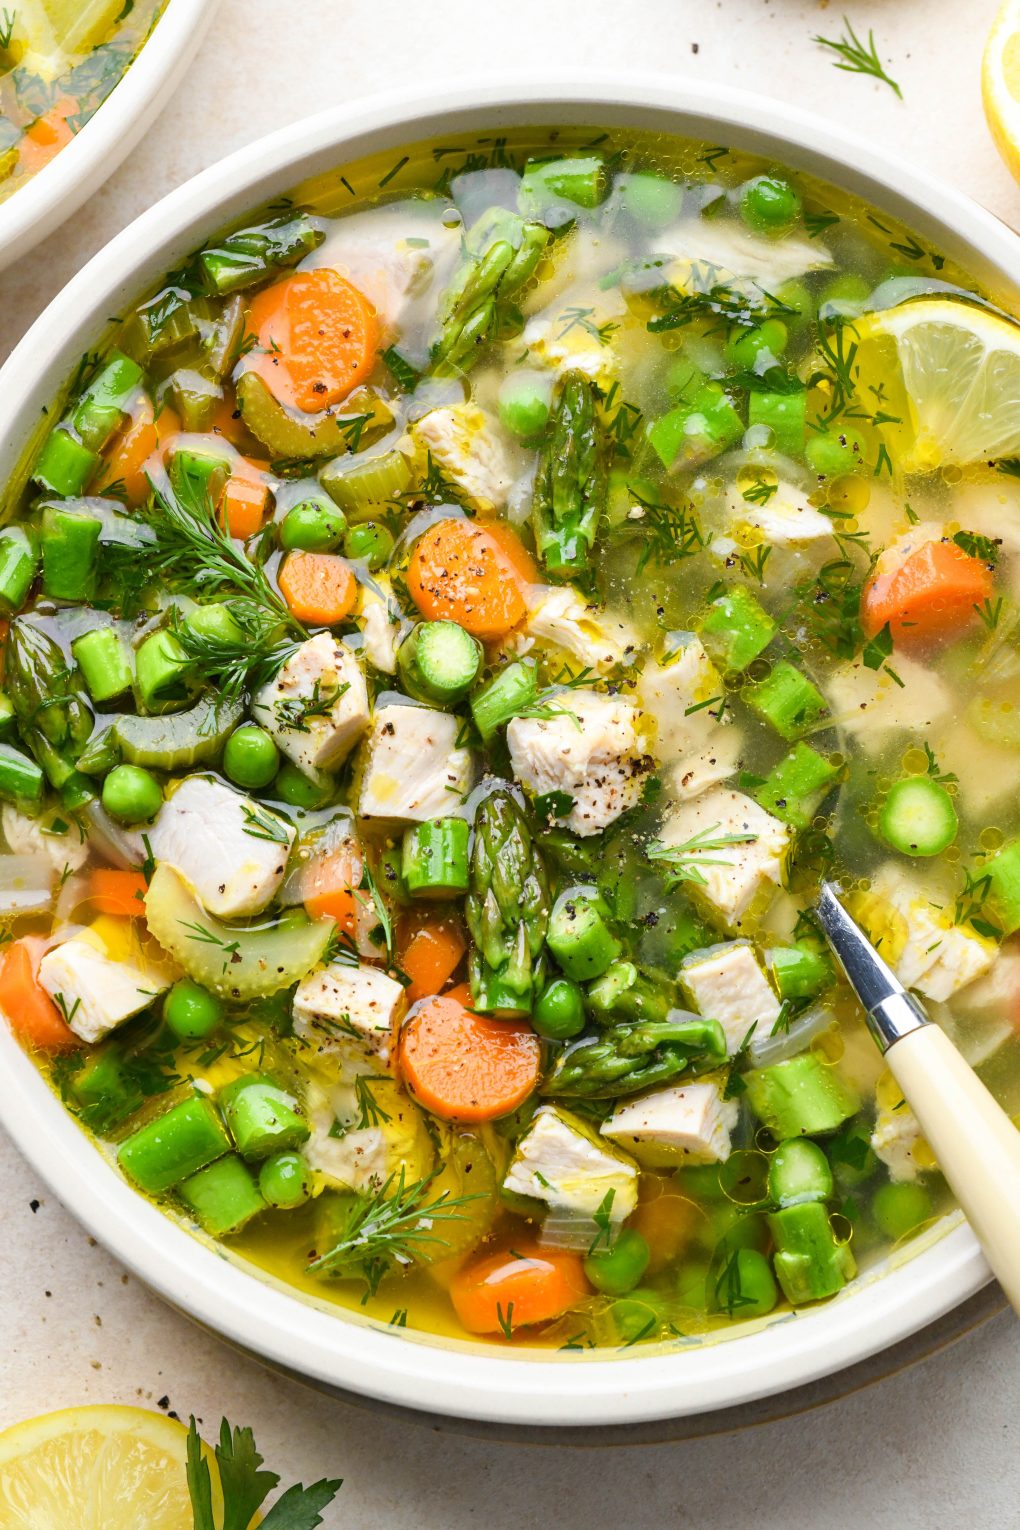 A shallow ceramic bowl filled with chicken soup with spring vegetables - peas, carrots, celery, and asparagus, with a spoon dipping in. Garnished with fresh dill and lemon wedges.